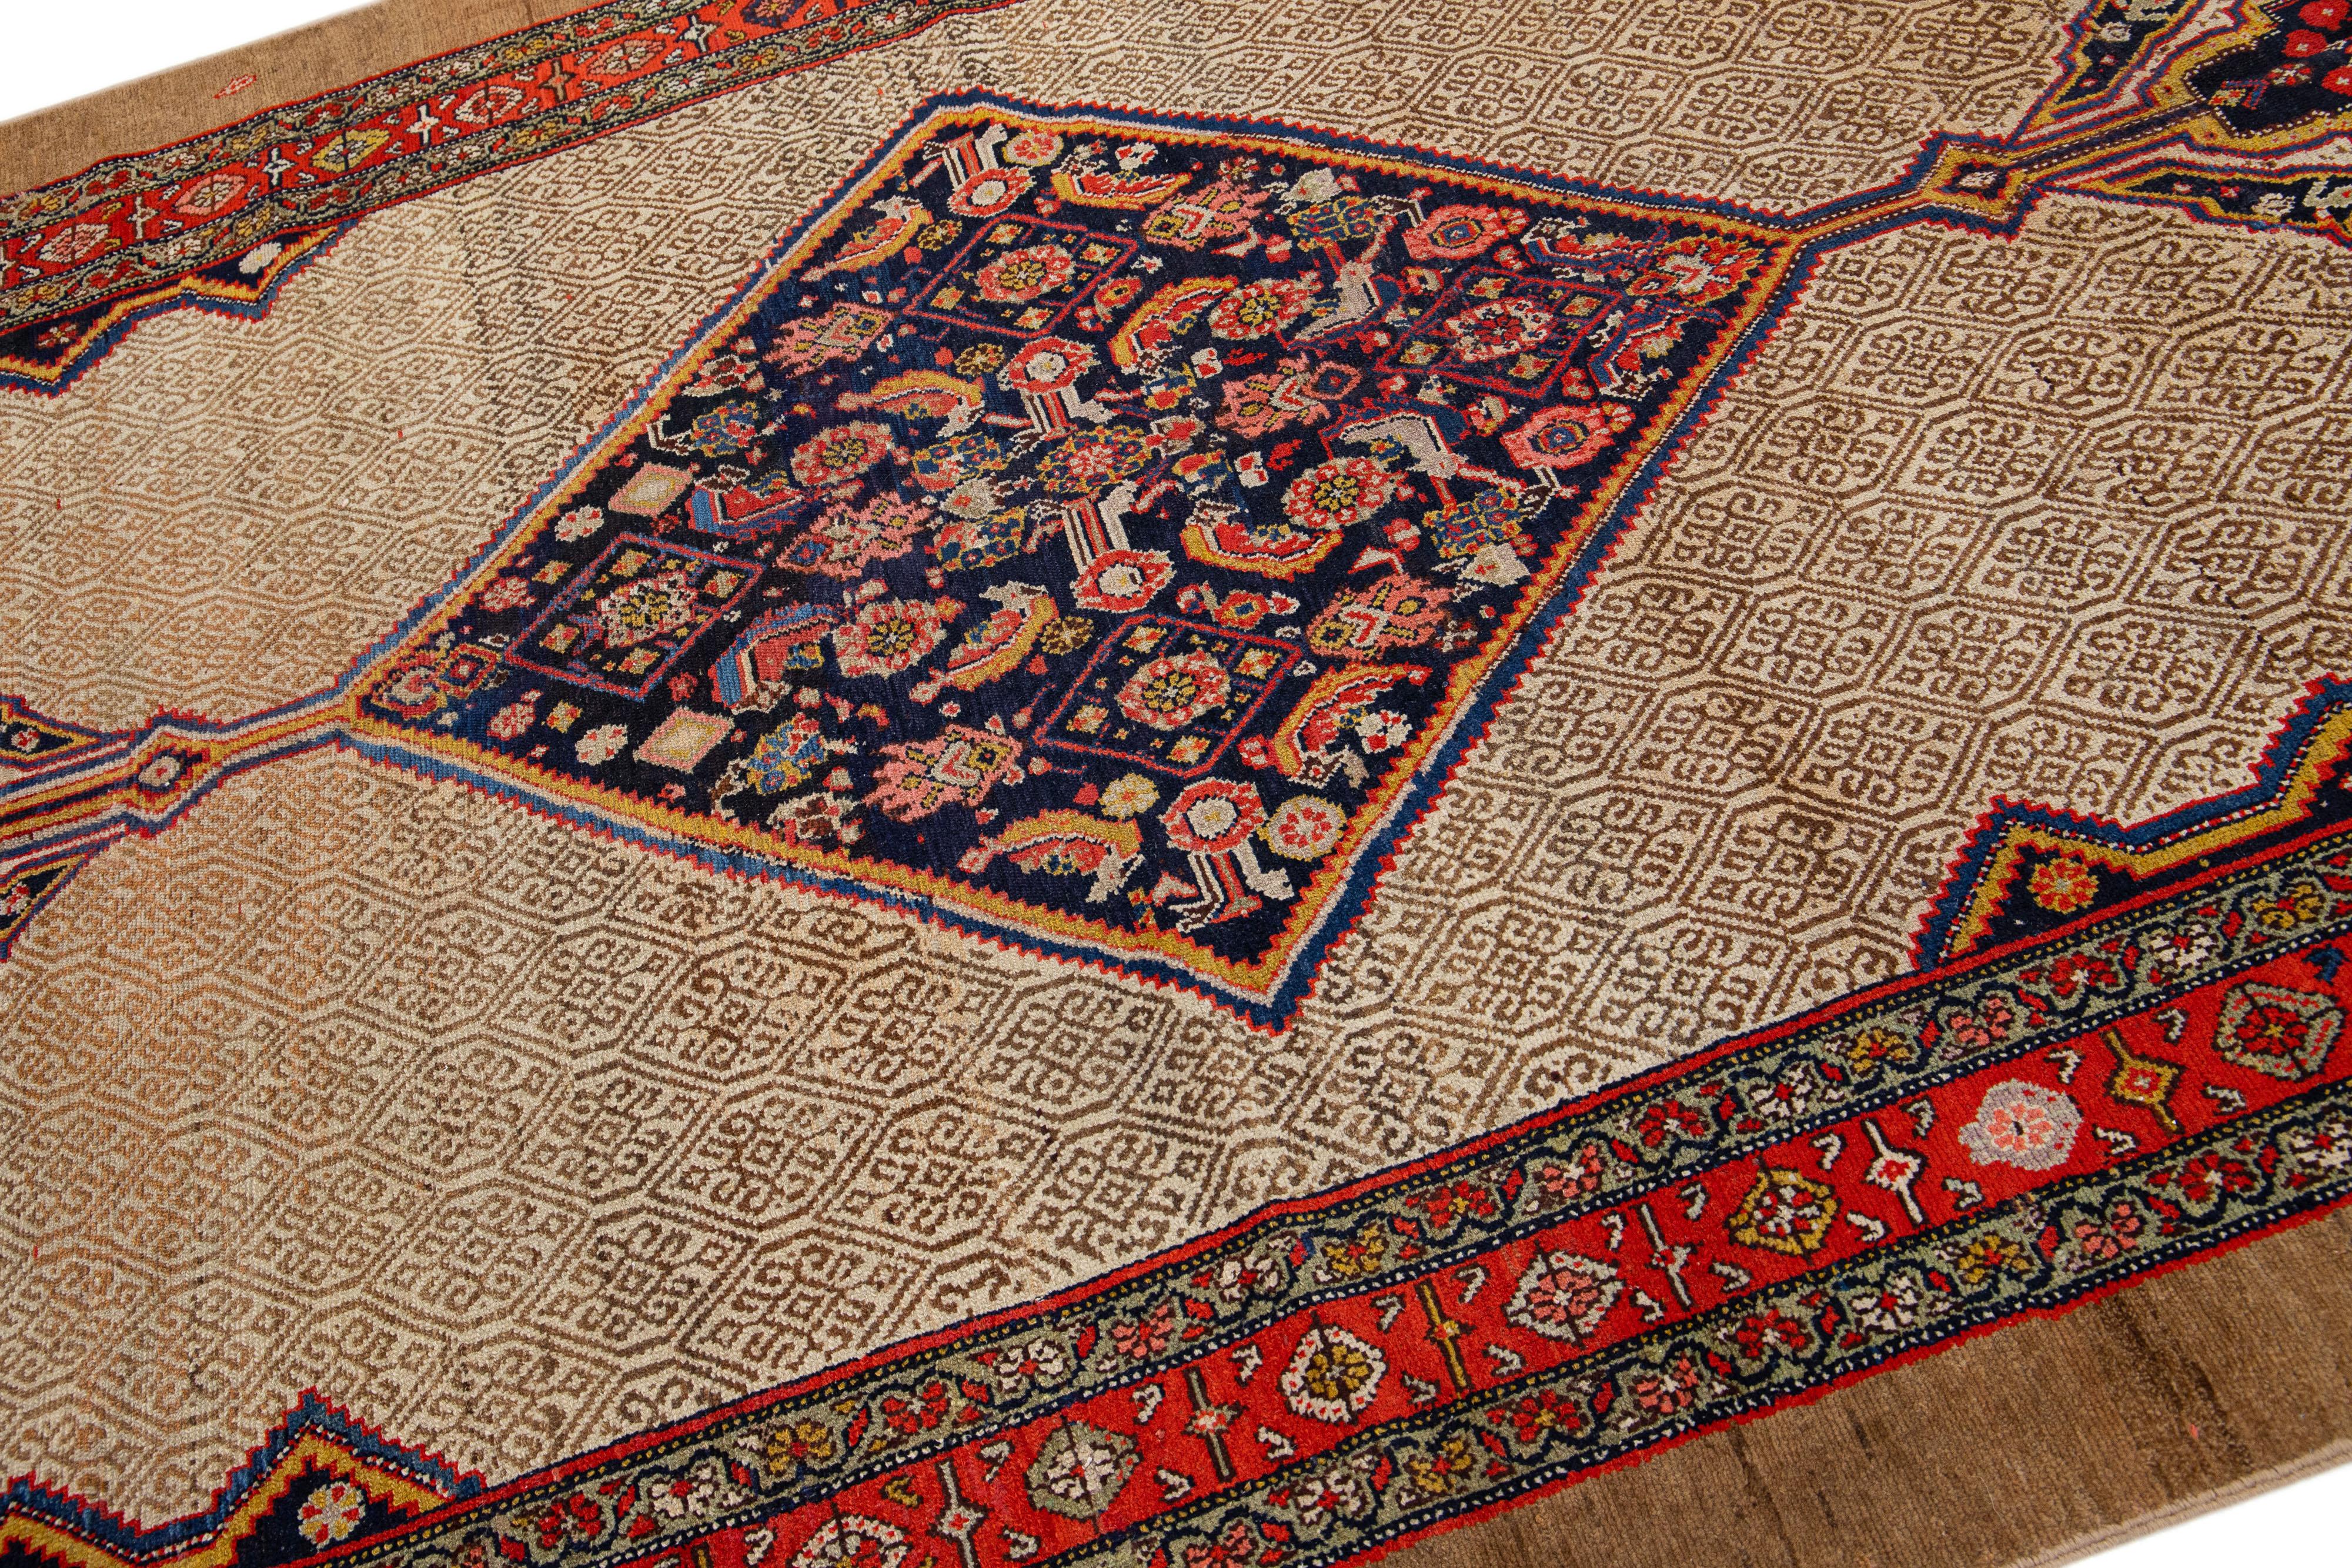 Islamic 1900s Persian Hamadan Gallery Wool Rug with Multicolor Medallion Design  For Sale